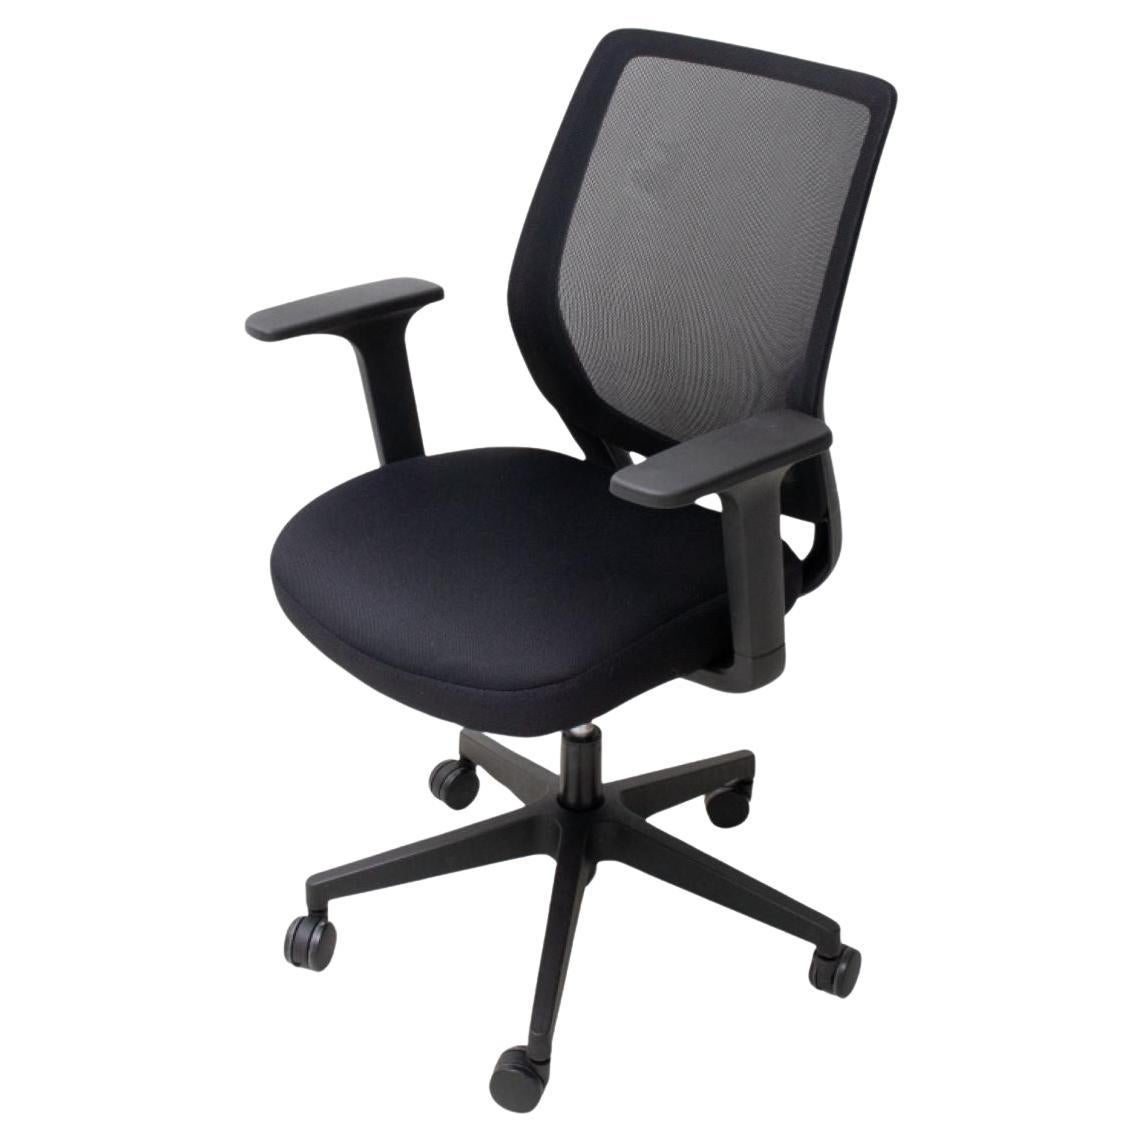 Contemporary Office chair